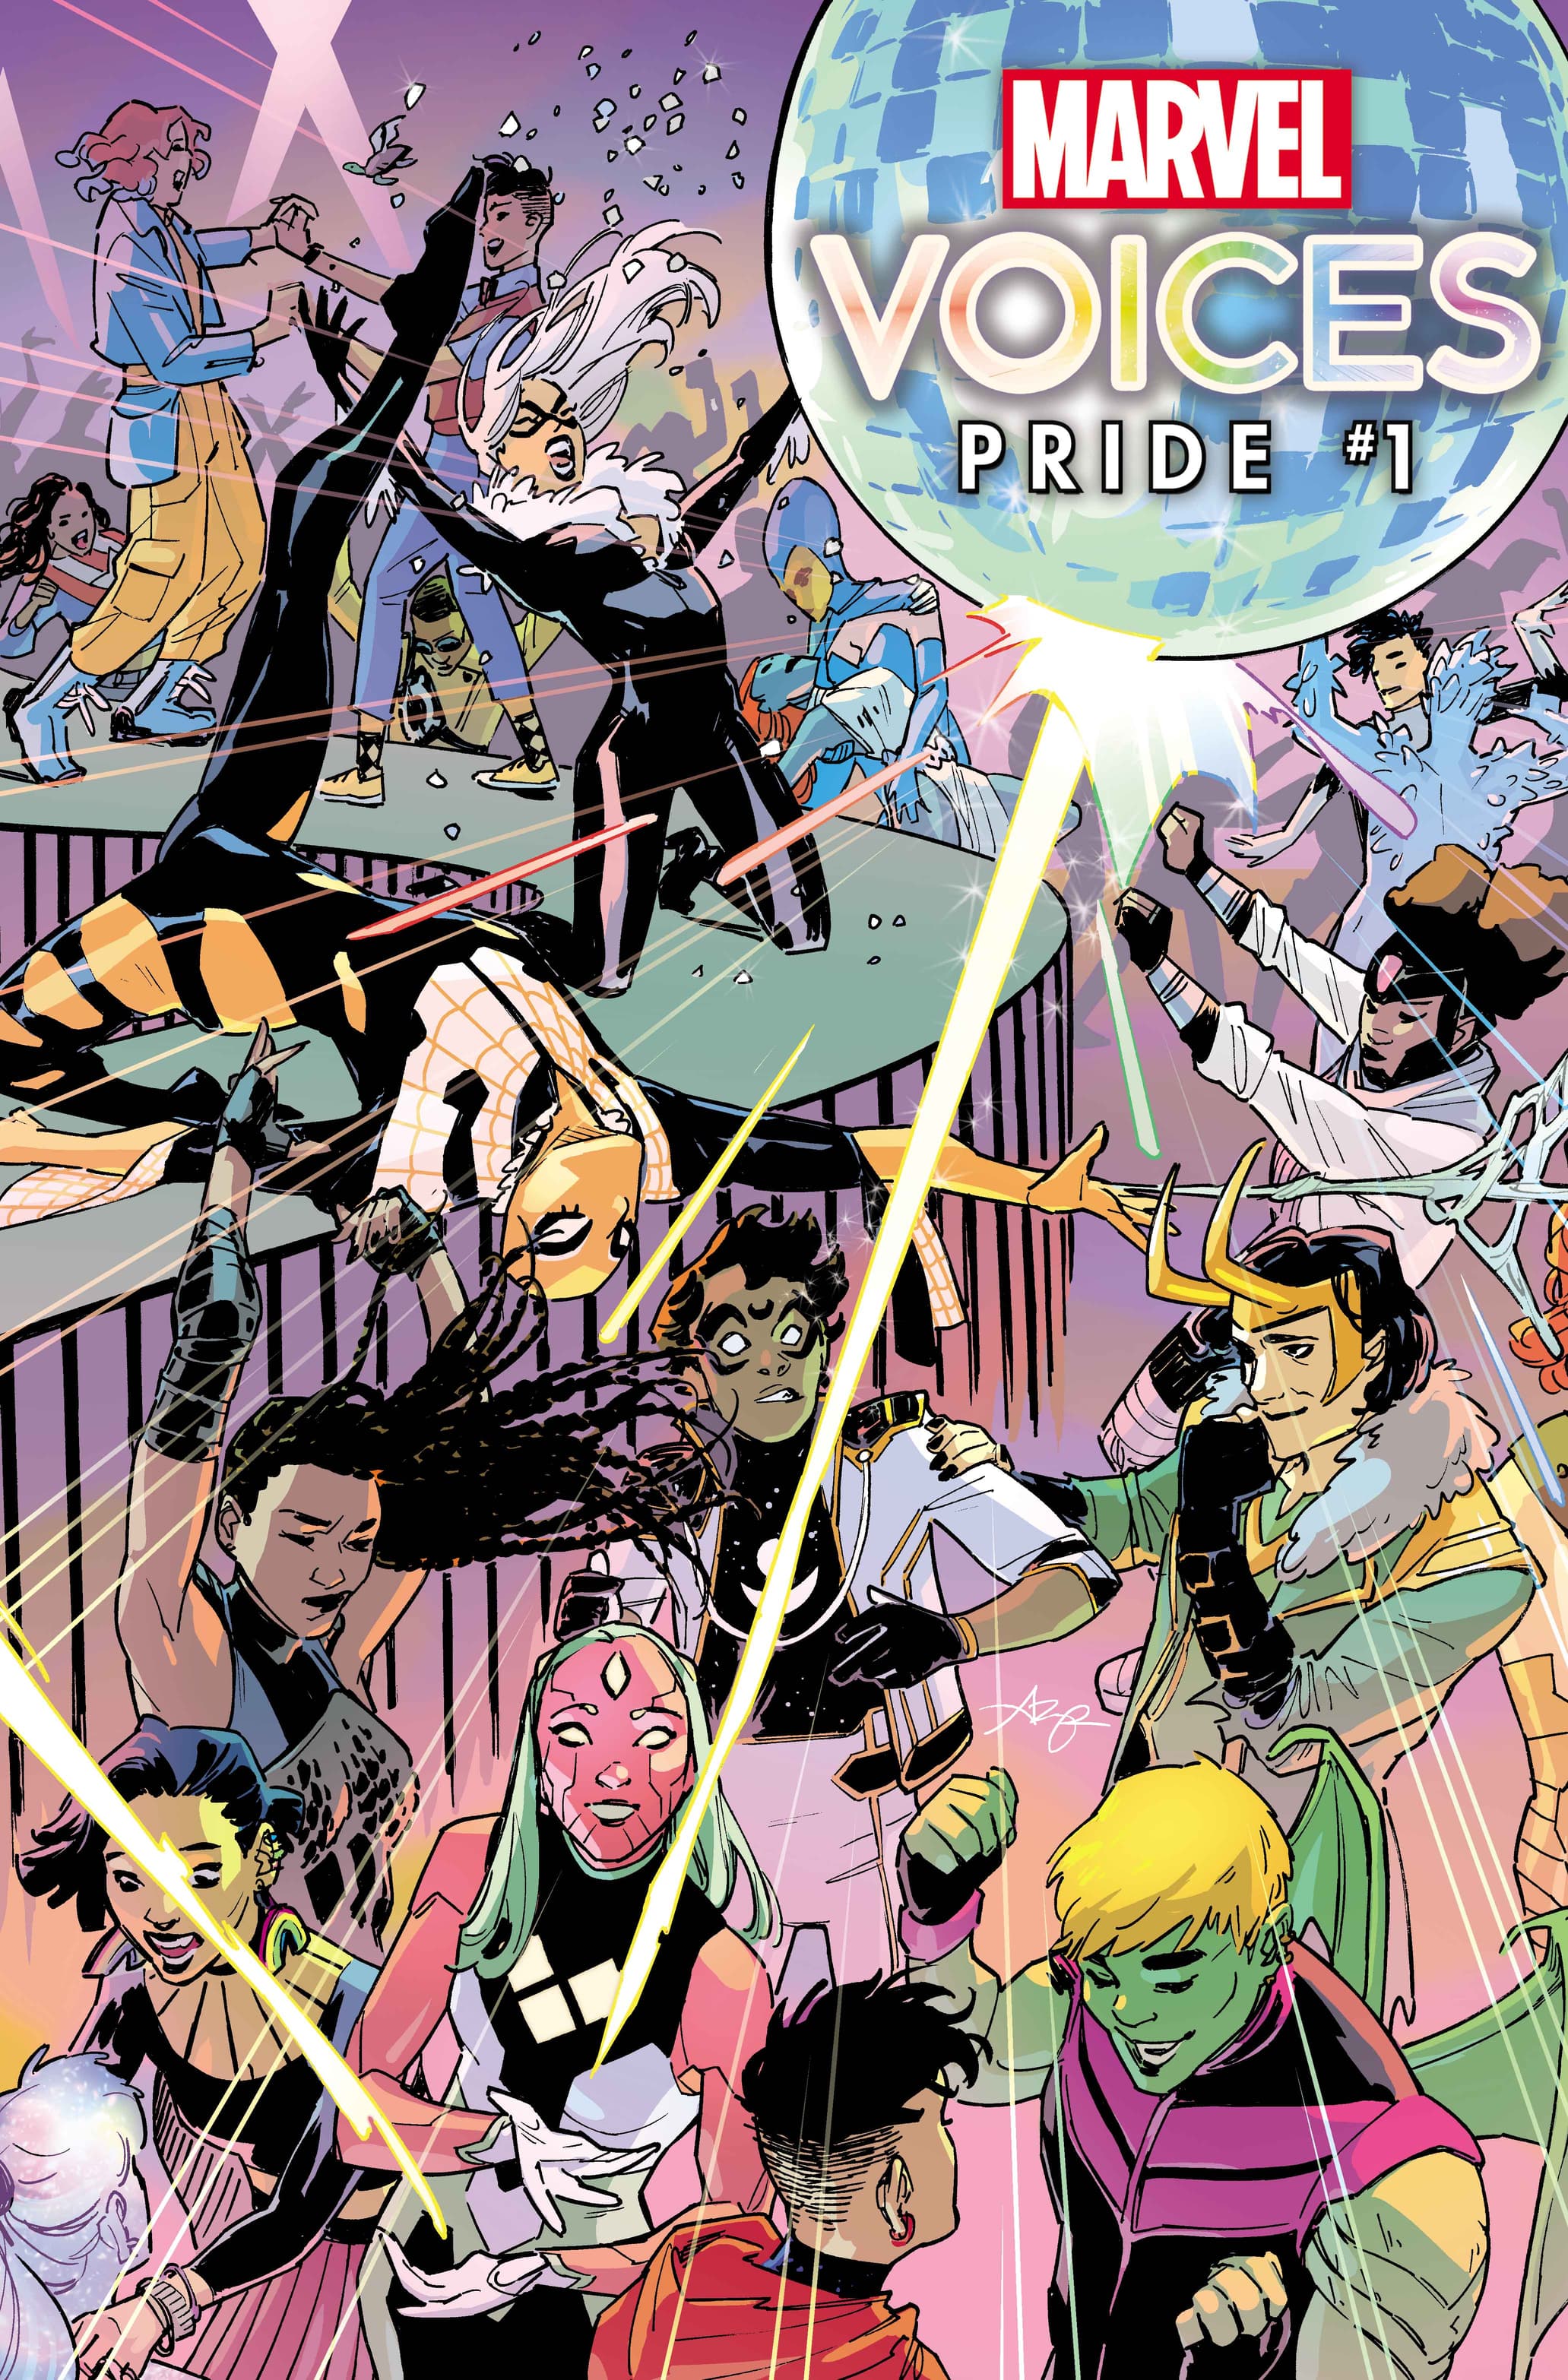 MARVEL’S VOICES: PRIDE #1 cover by Amy Reeder